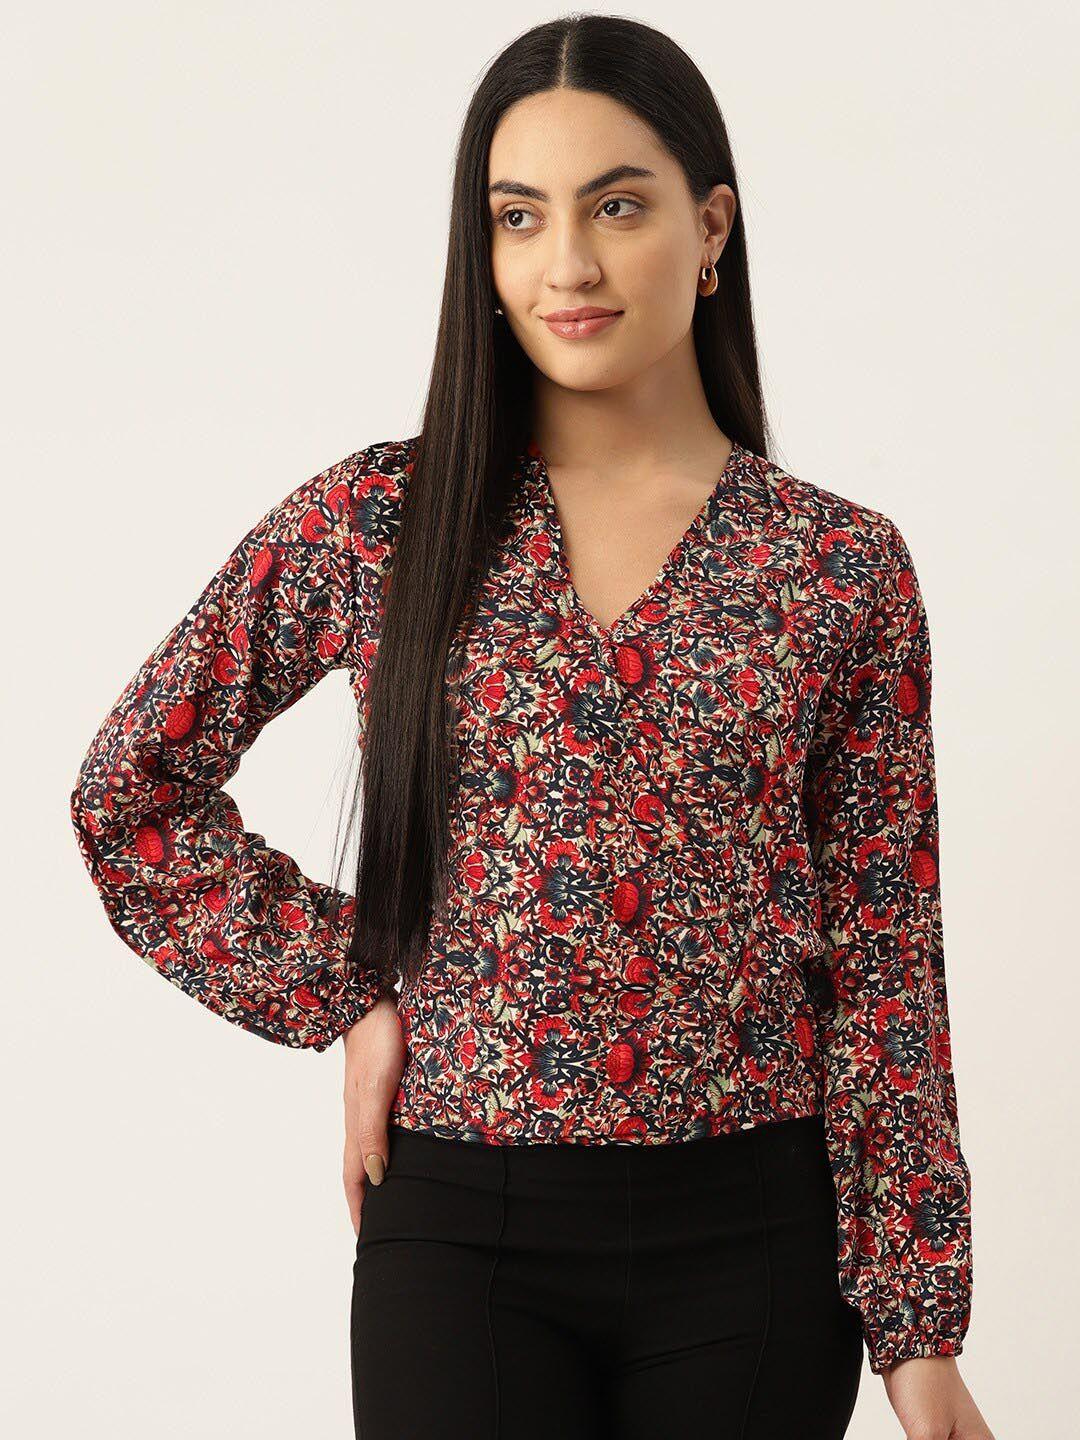 baesd floral printed v-neck cuffed sleeves cotton top